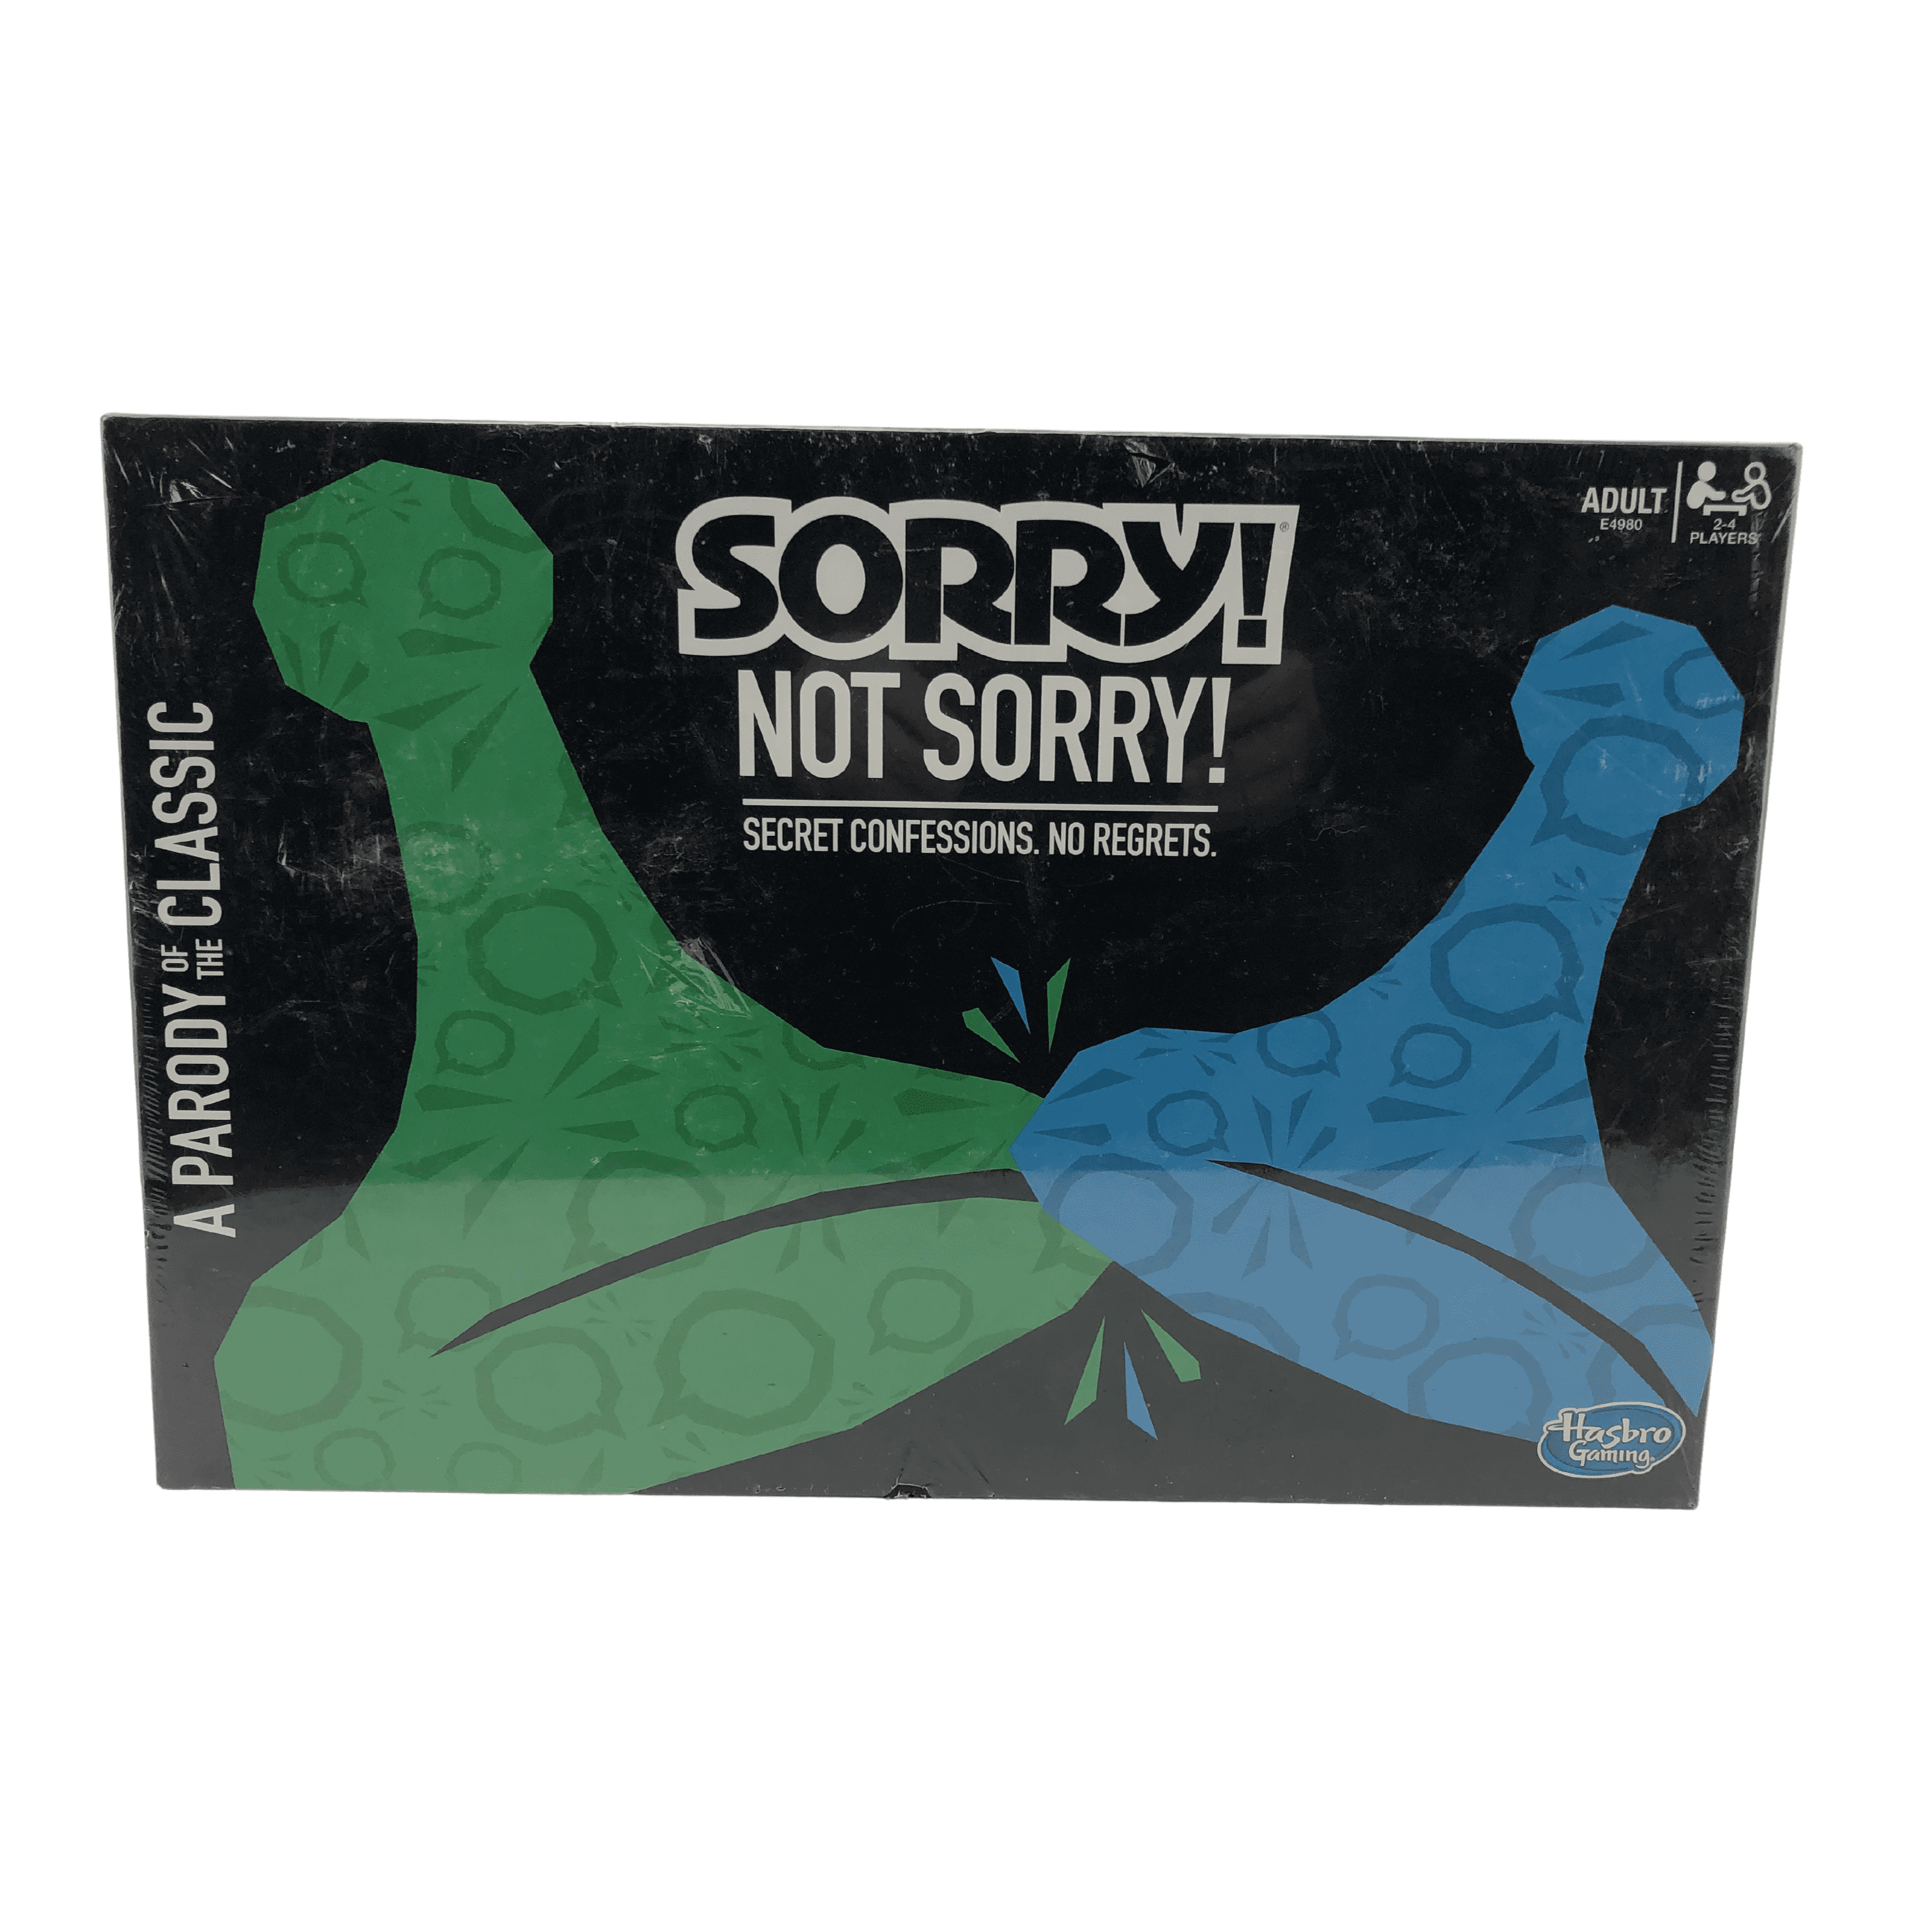 Hasbro Gaming Sorry! Not Sorry! Parody board game for adults